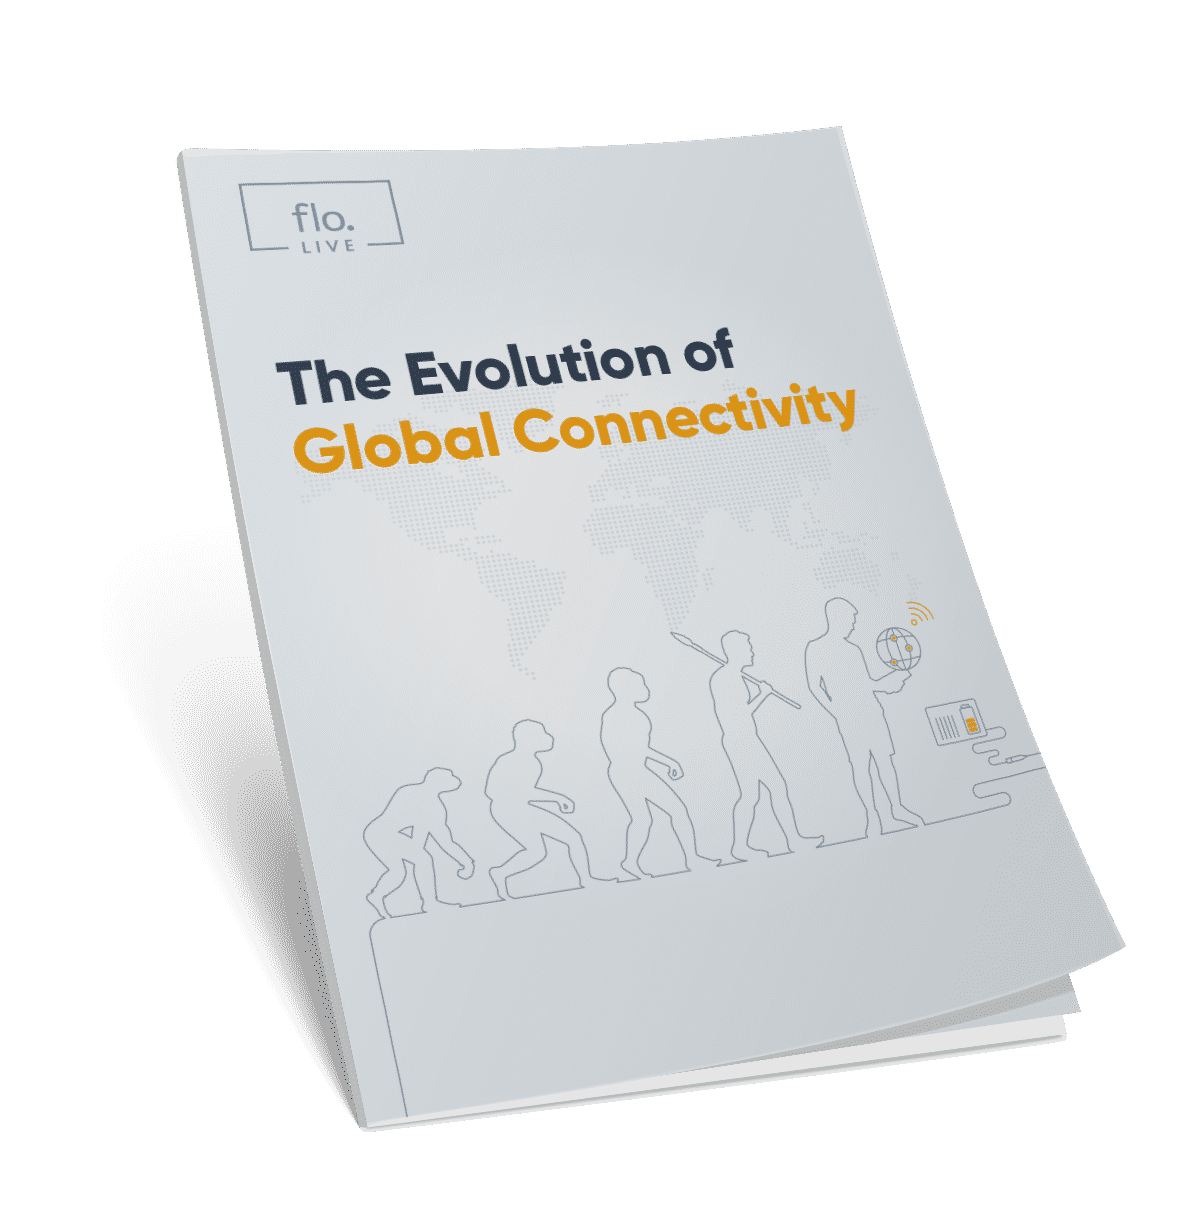 The evolution of global connectivity